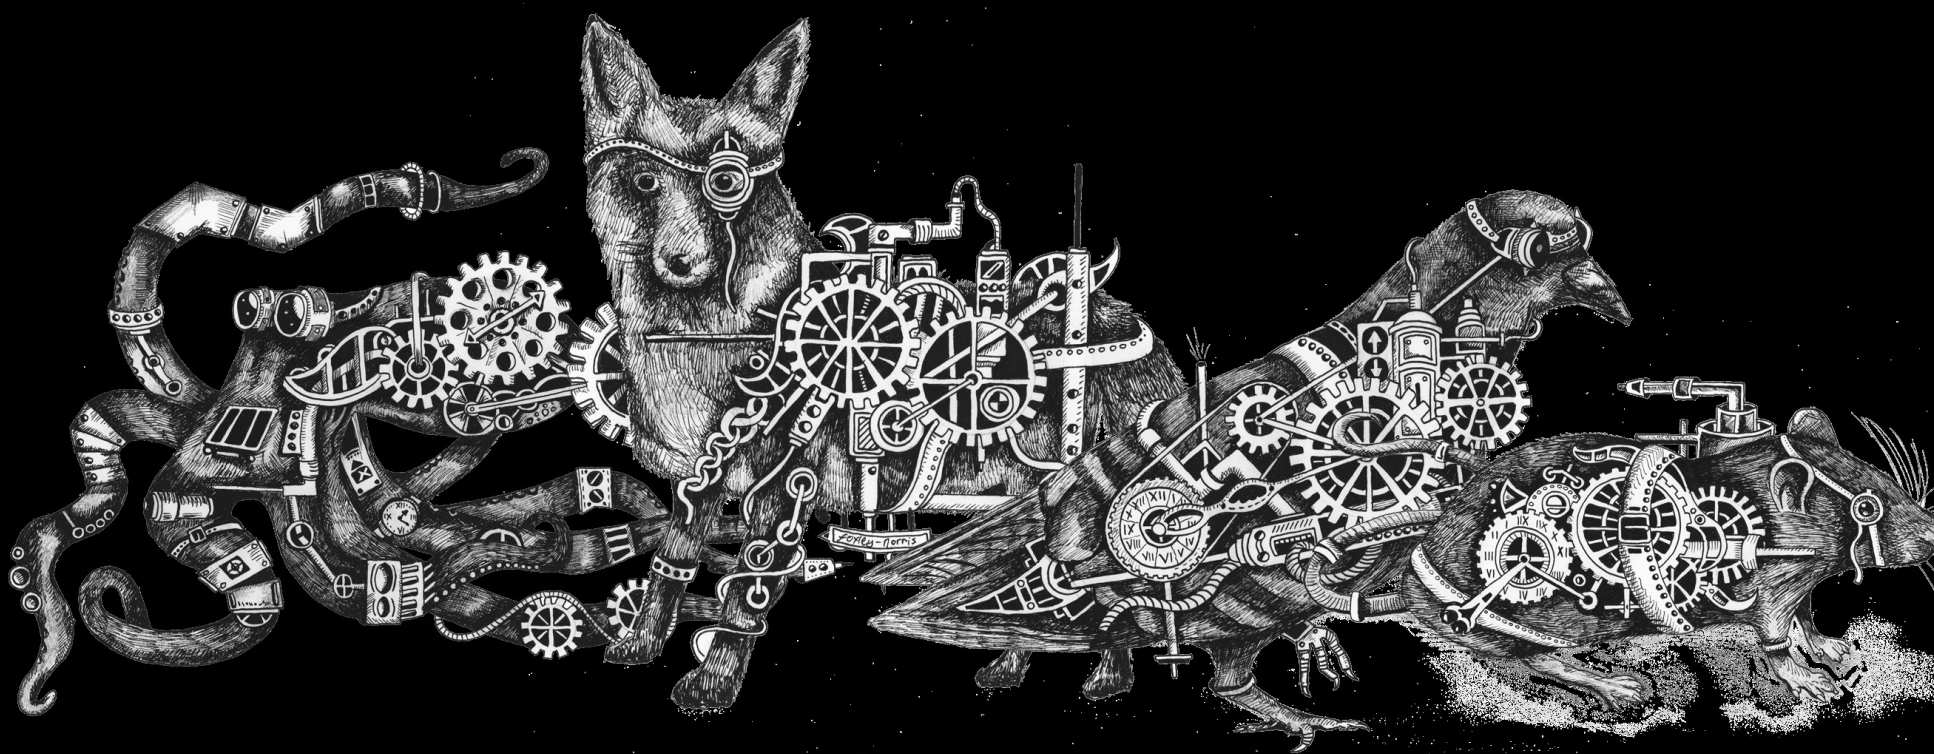 An illustration of animals made of cogs